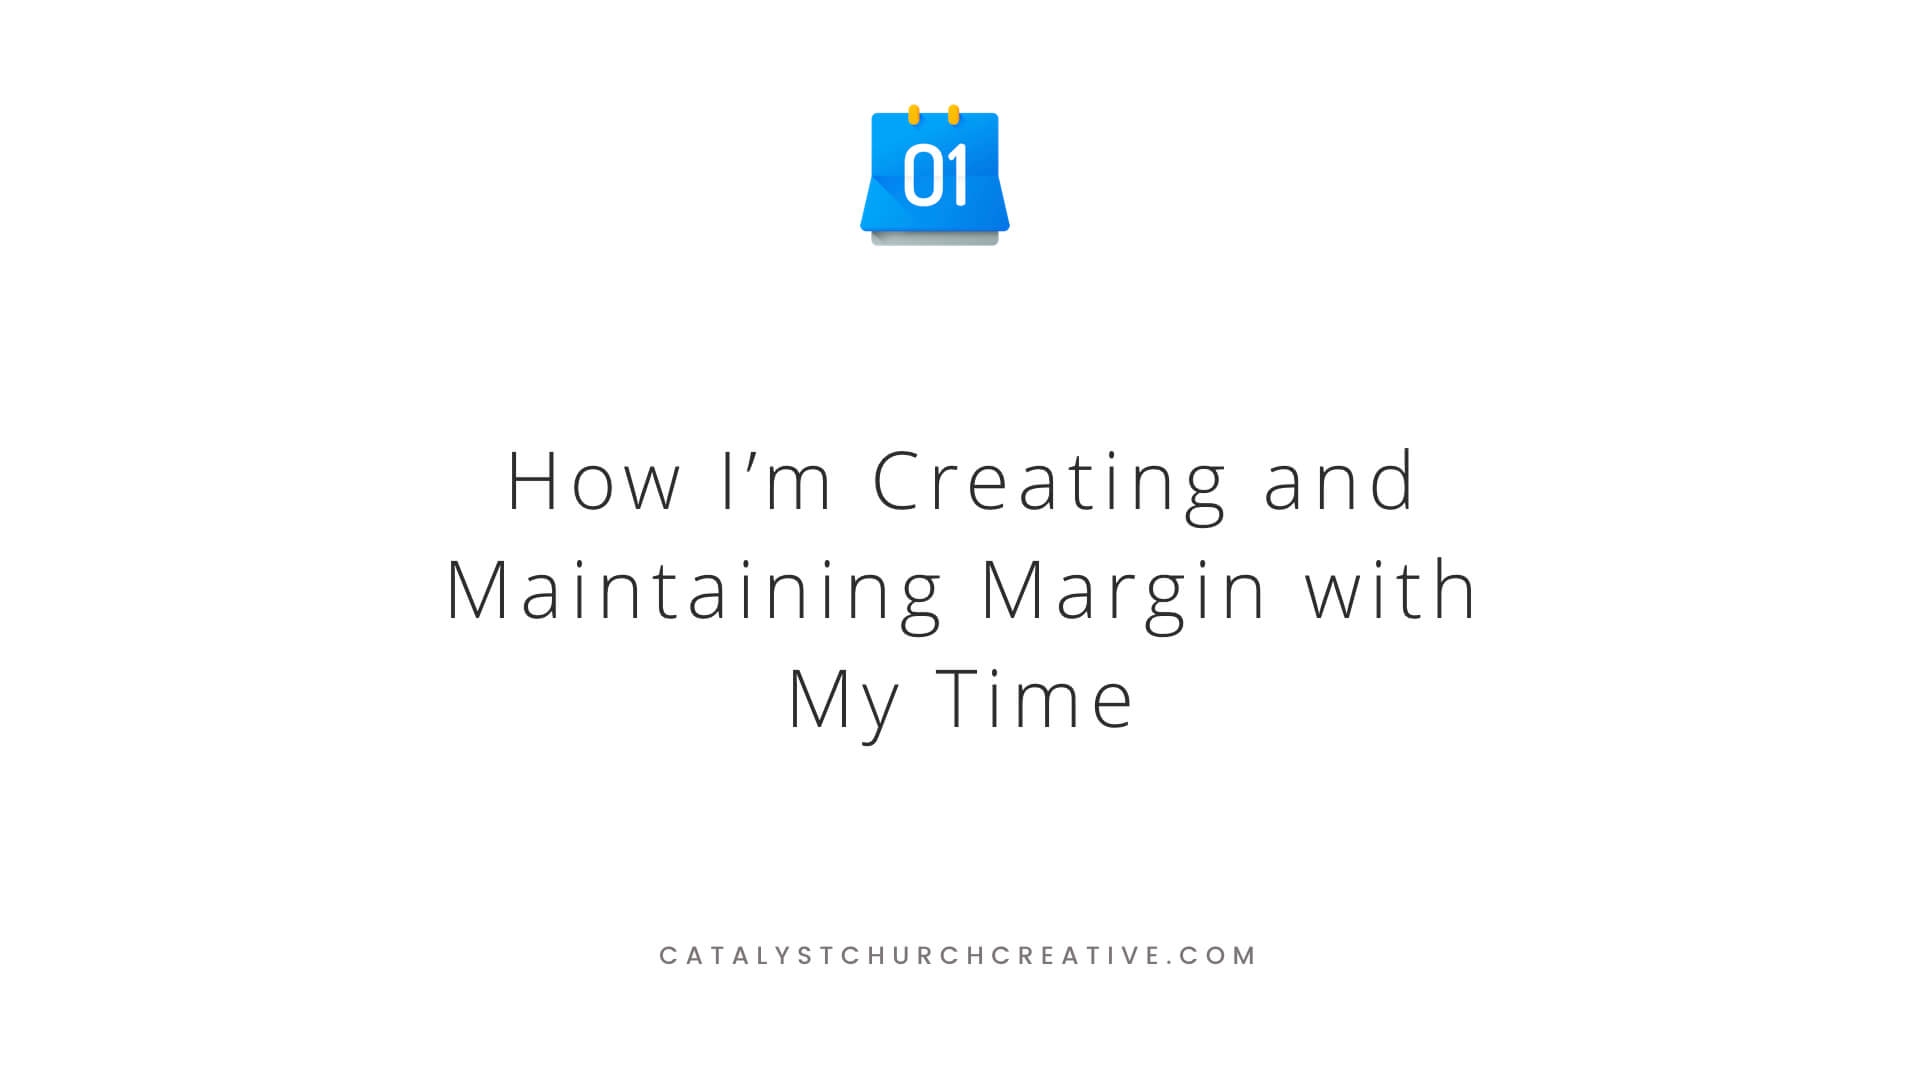 How I’m Creating and Maintaining Margin with My Time